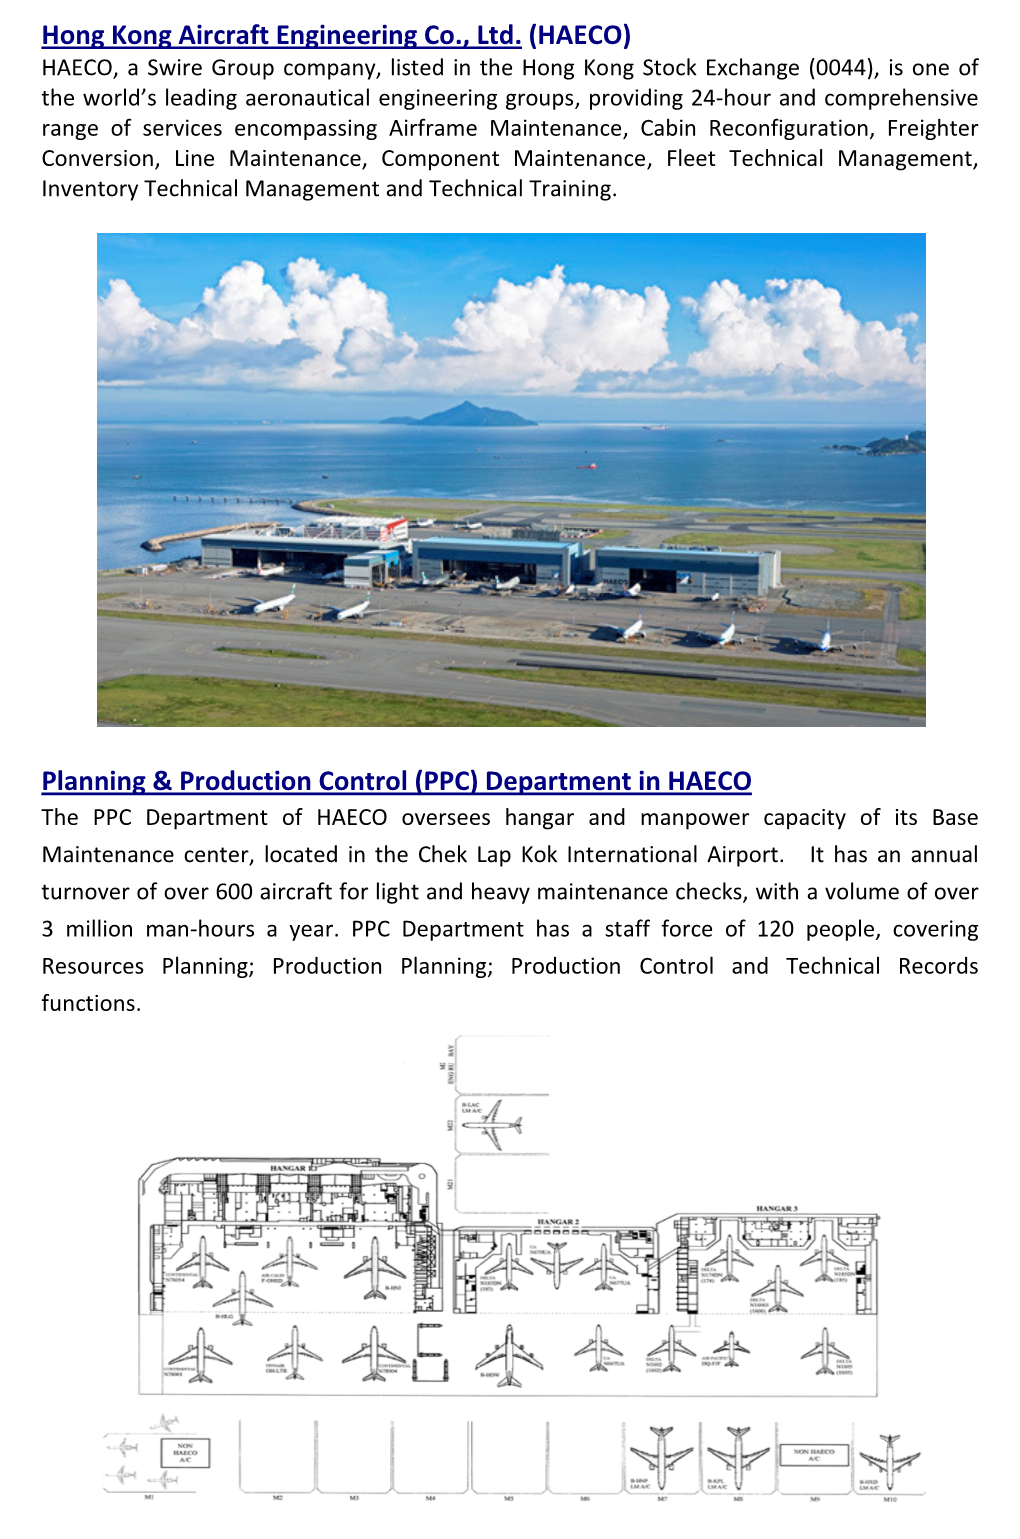 Hong Kong Aircraft Engineering Co., Ltd. (HAECO) Planning & Production Control (PPC) Department in HAECO